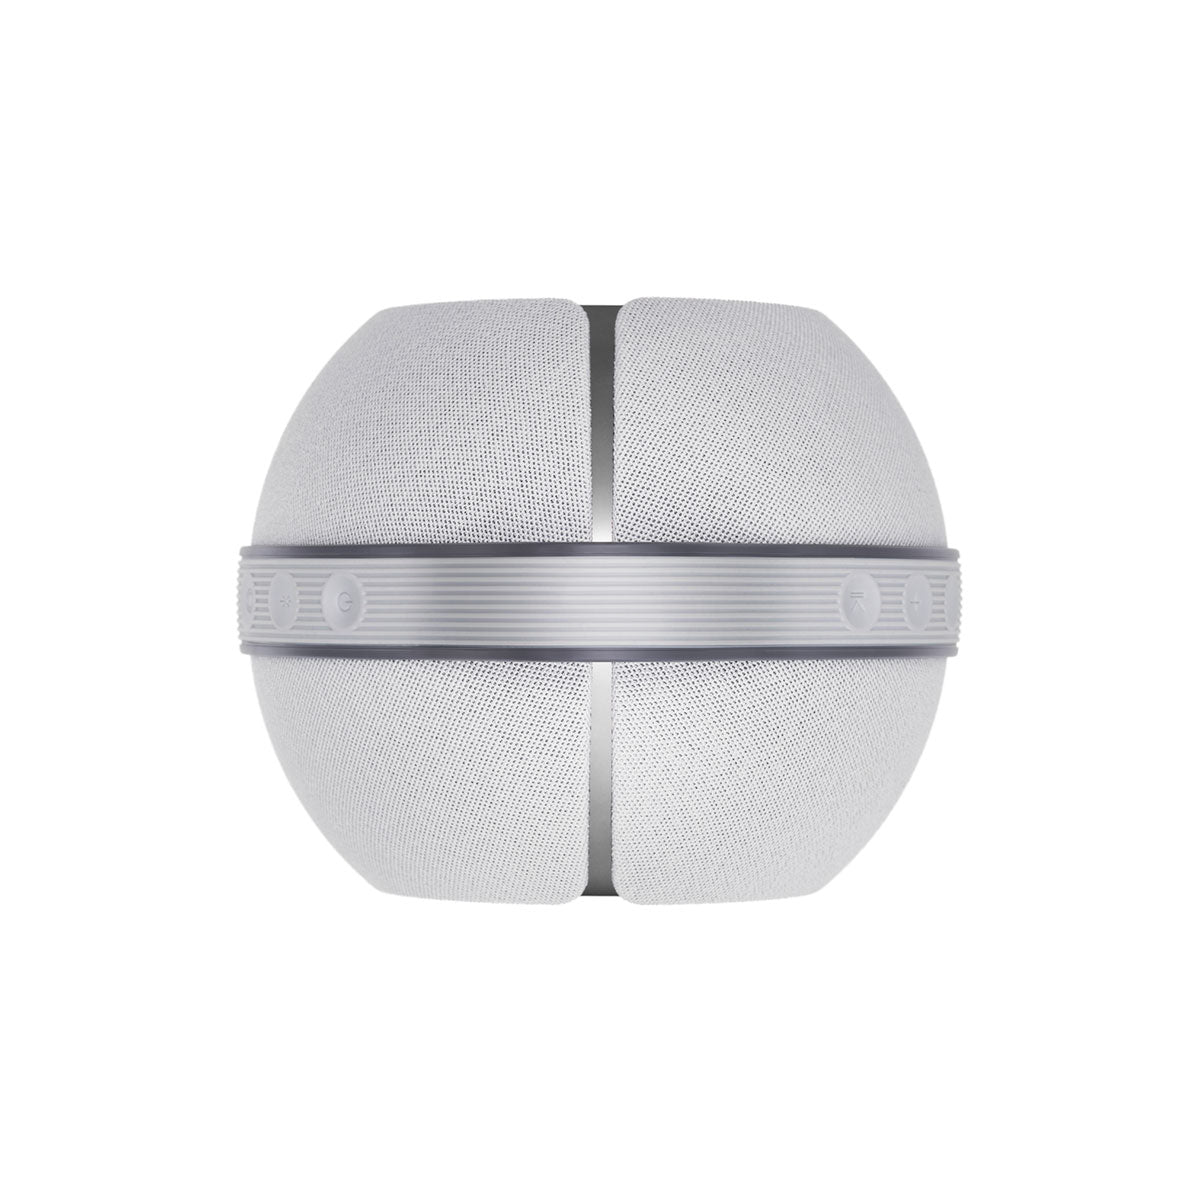 Devialet Mania Light Grey 音響 Microworks Online Store